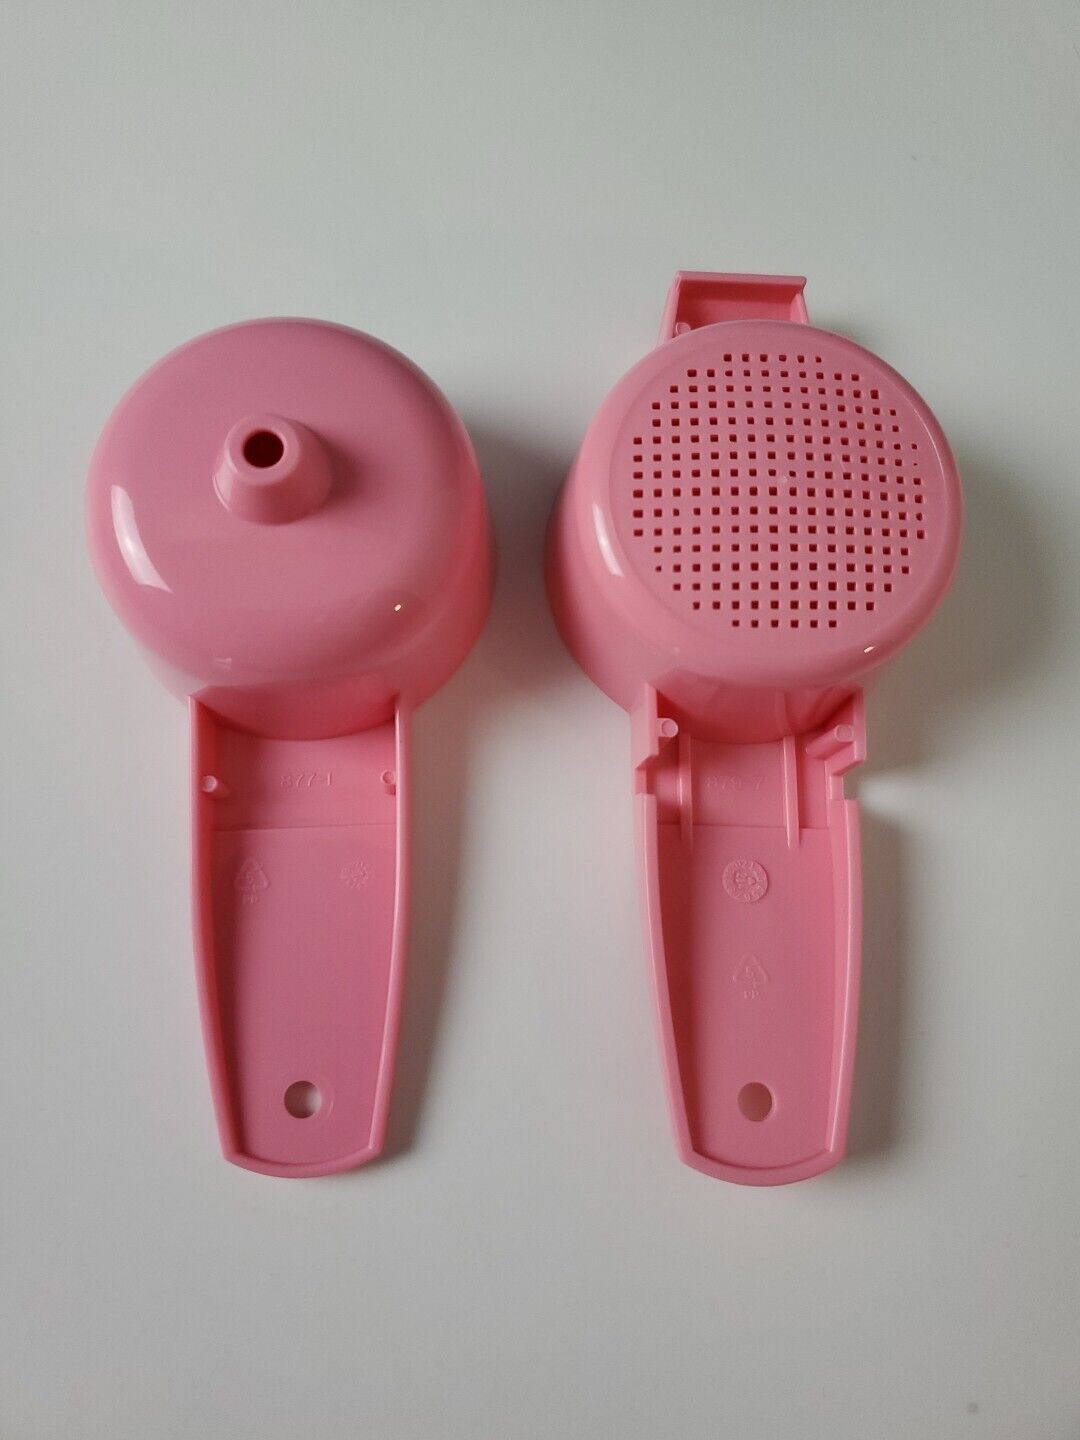 Tupperware Mini Strainer Sifter Funnel Set of 2 Gadgets Pink new